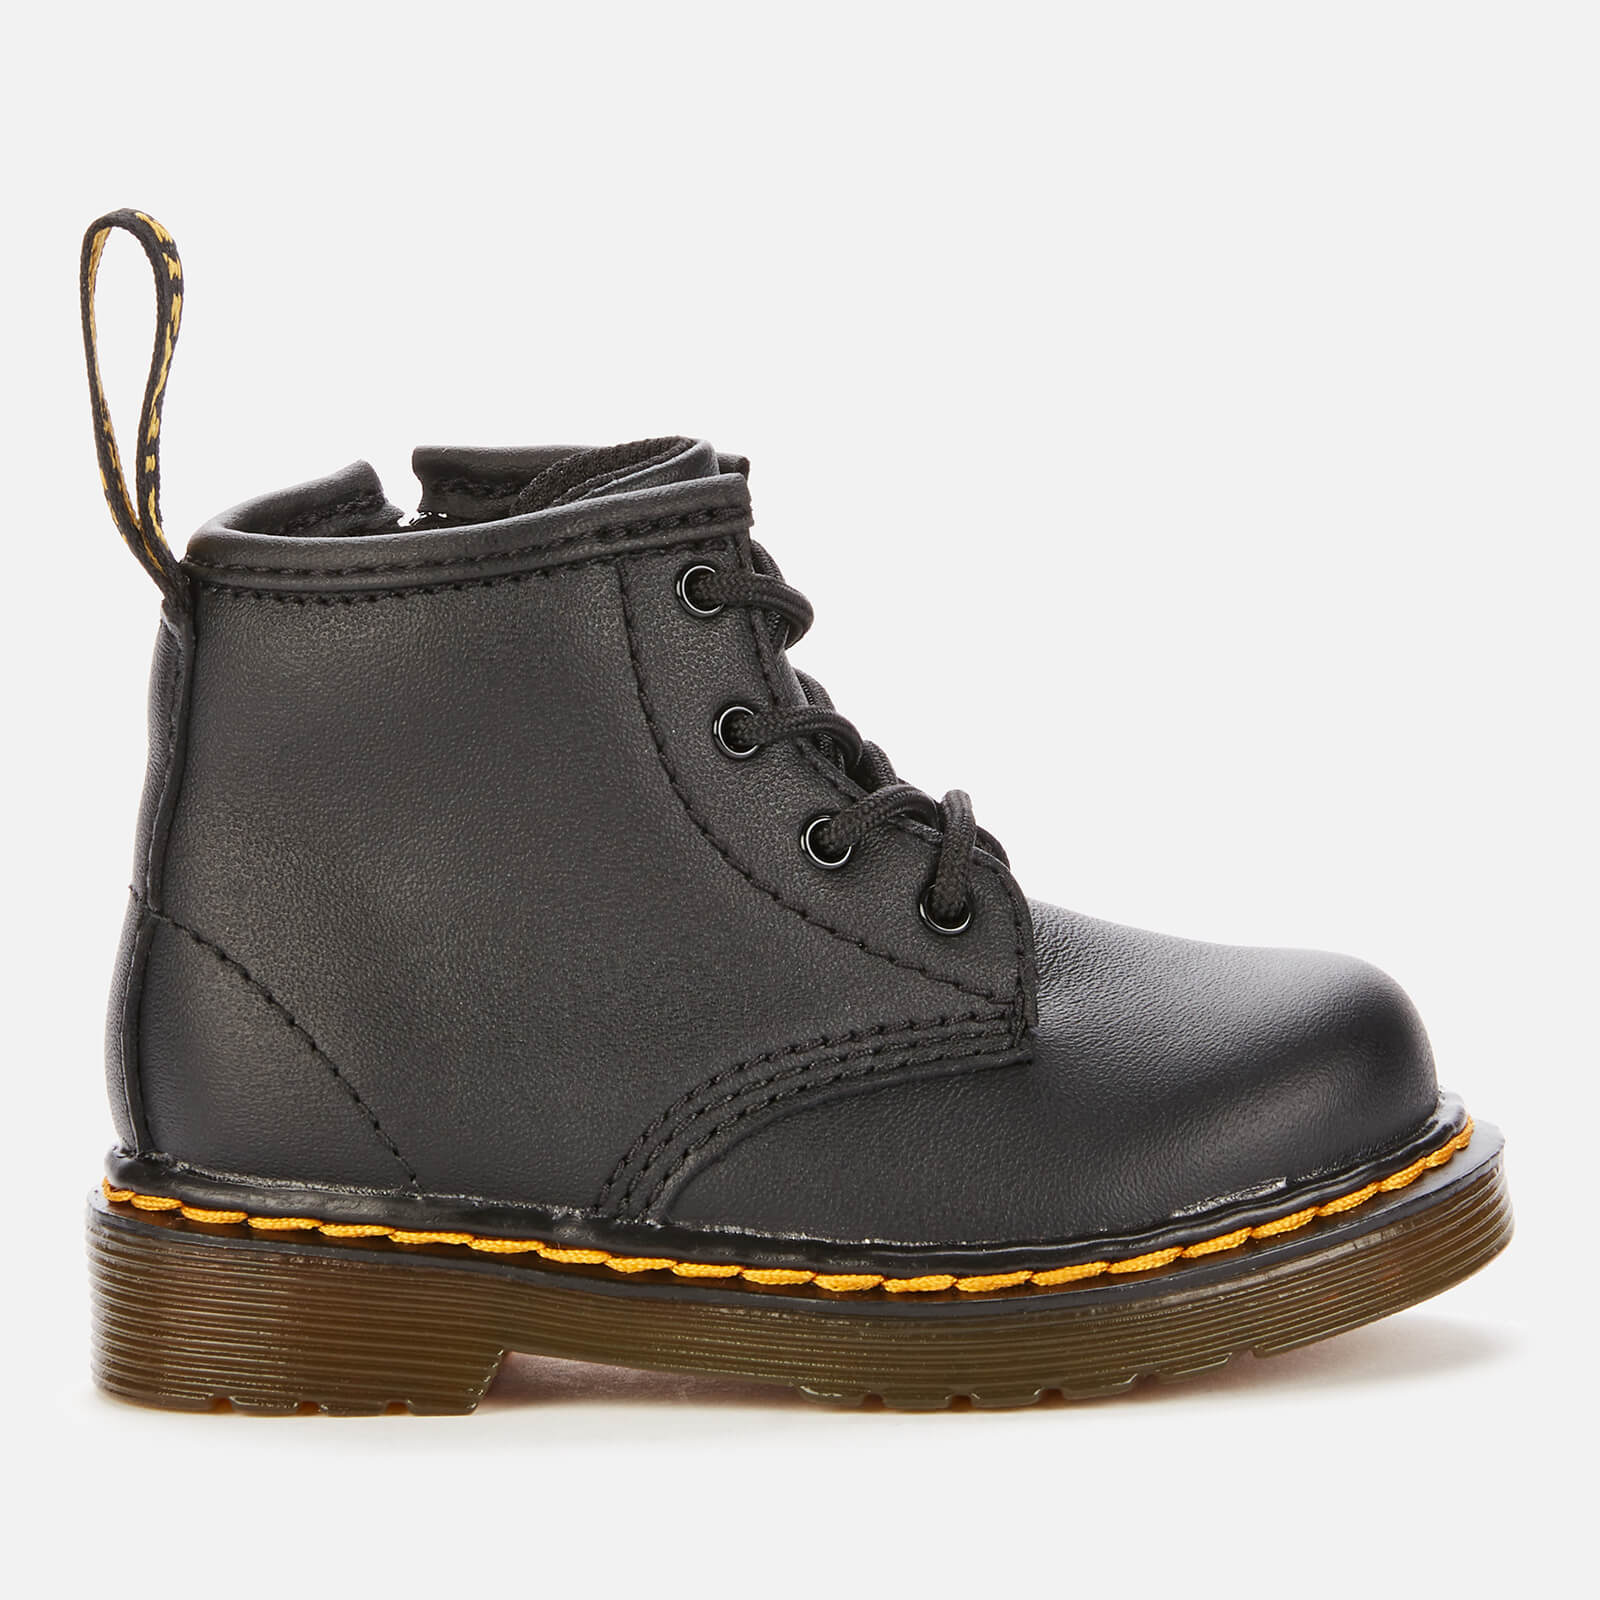 Dr. Martens Toddlers' 1460 Leather Lace-Up 4 Eye Boots - Black - UK 4 Toddler